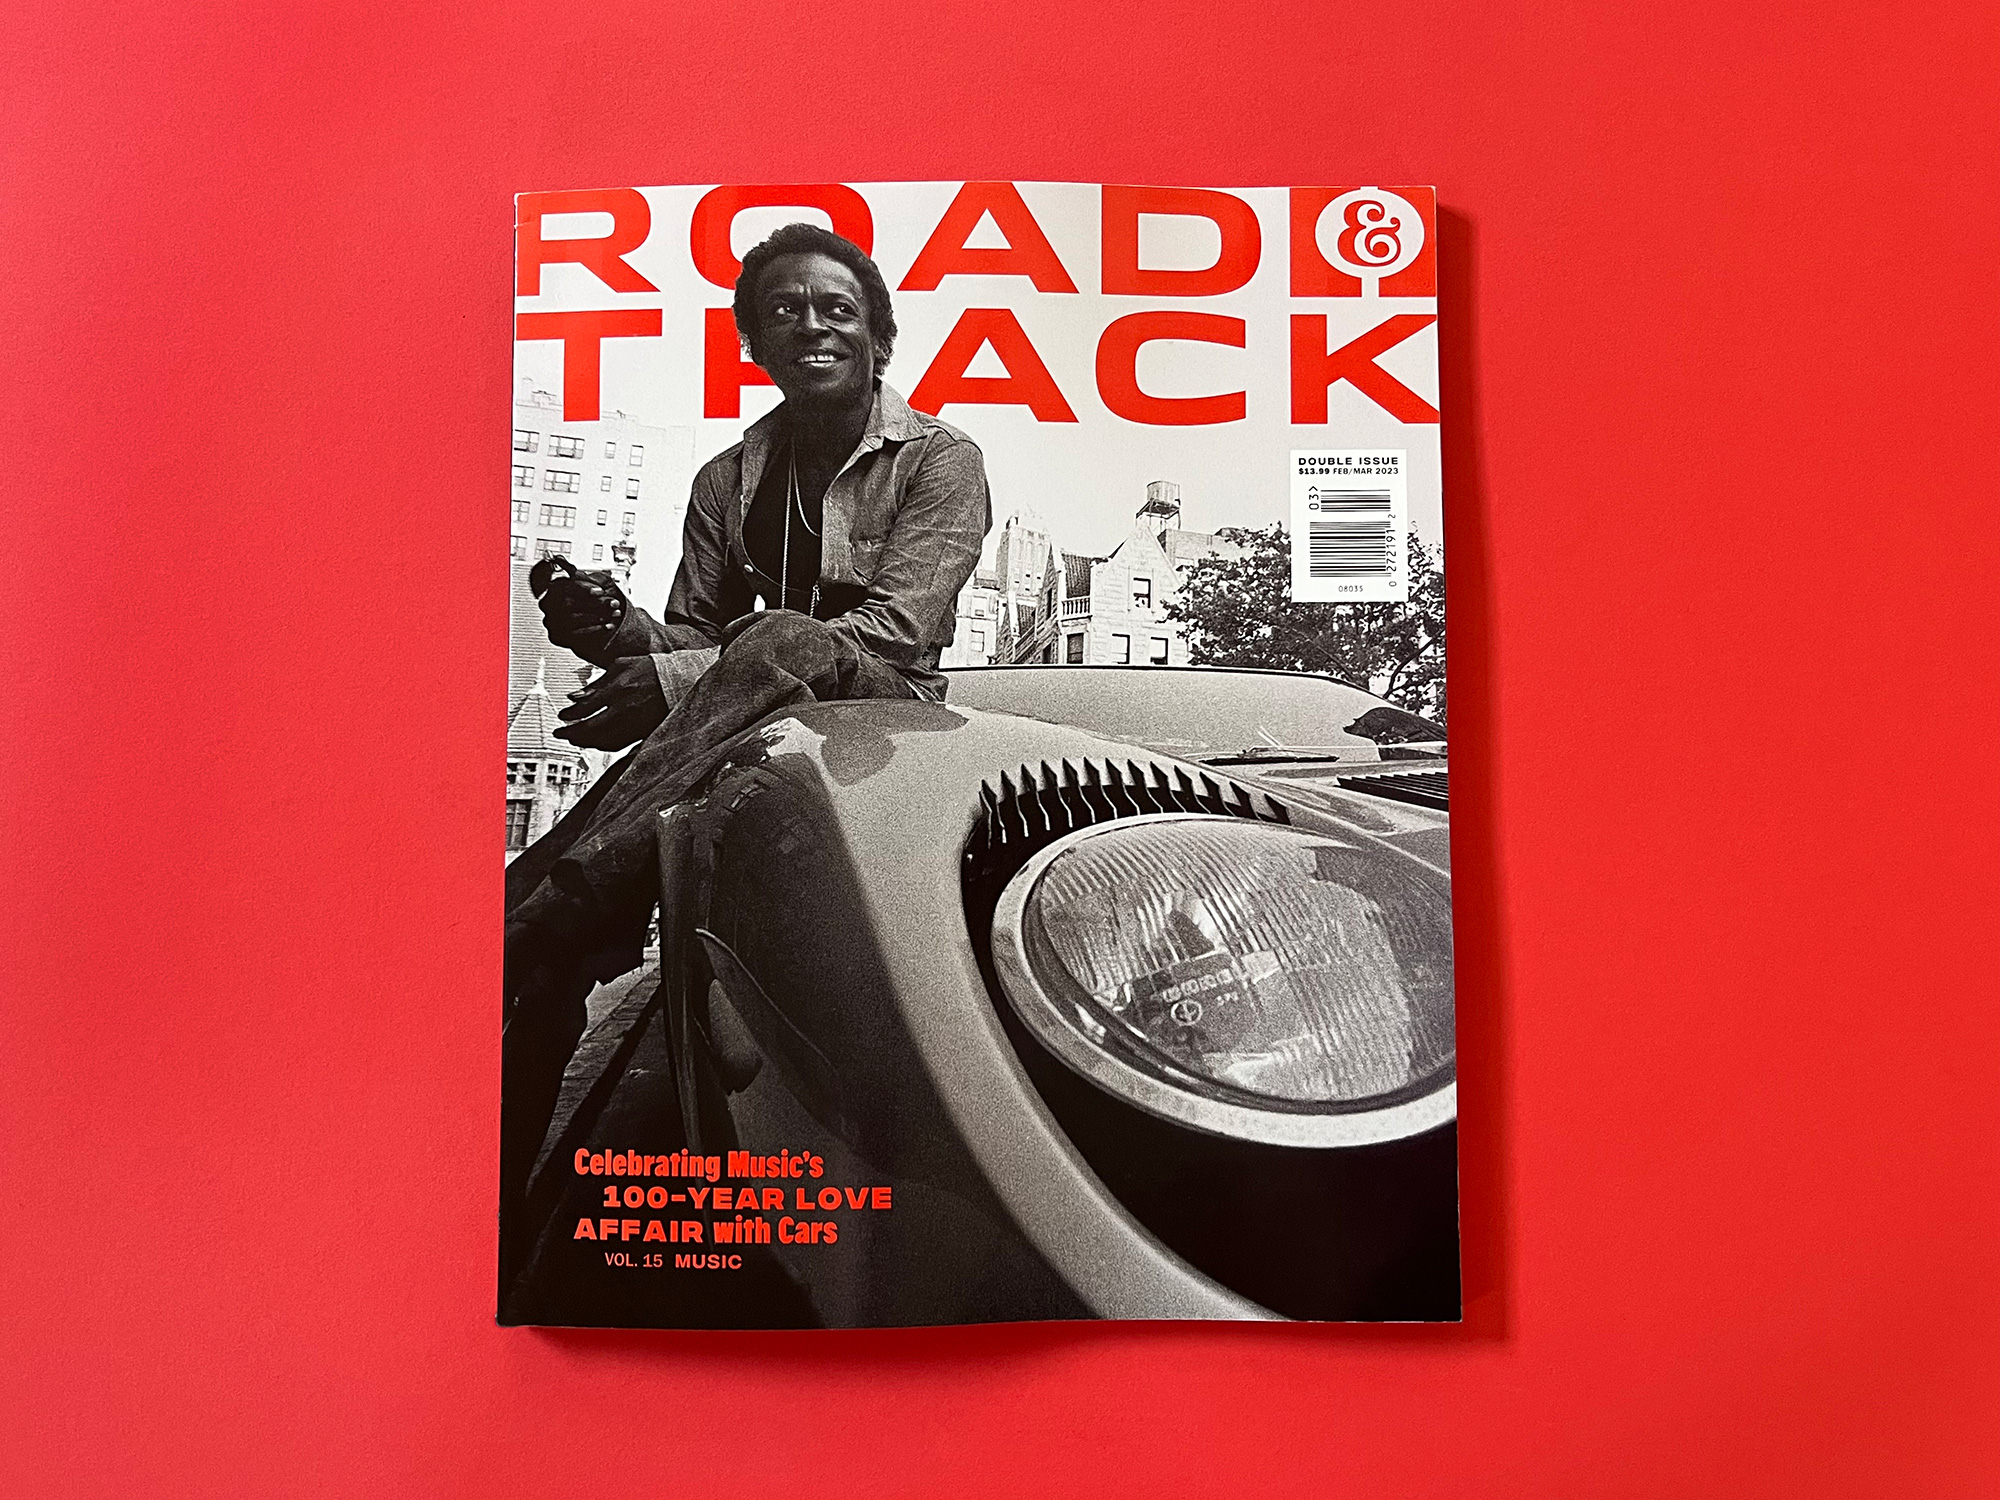 road & track music issue cover with miles davis on red